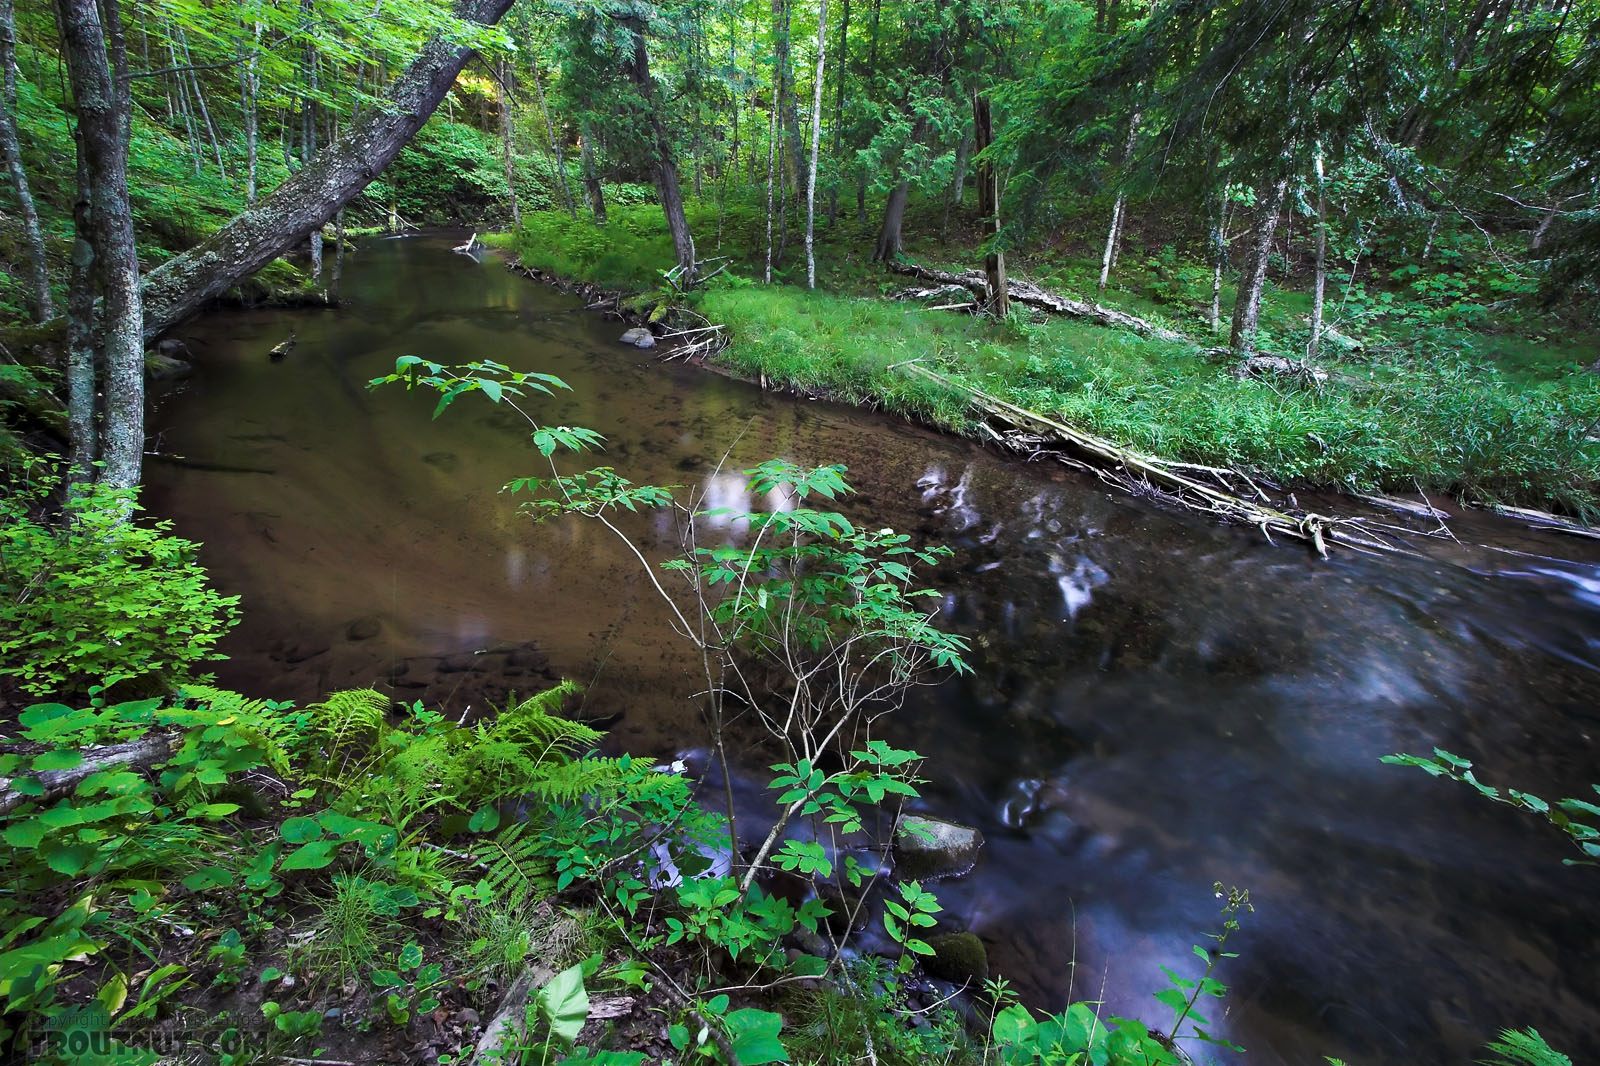 This is one of my favorite small-stream pools. From the Long Lake Branch of the White River in Wisconsin.